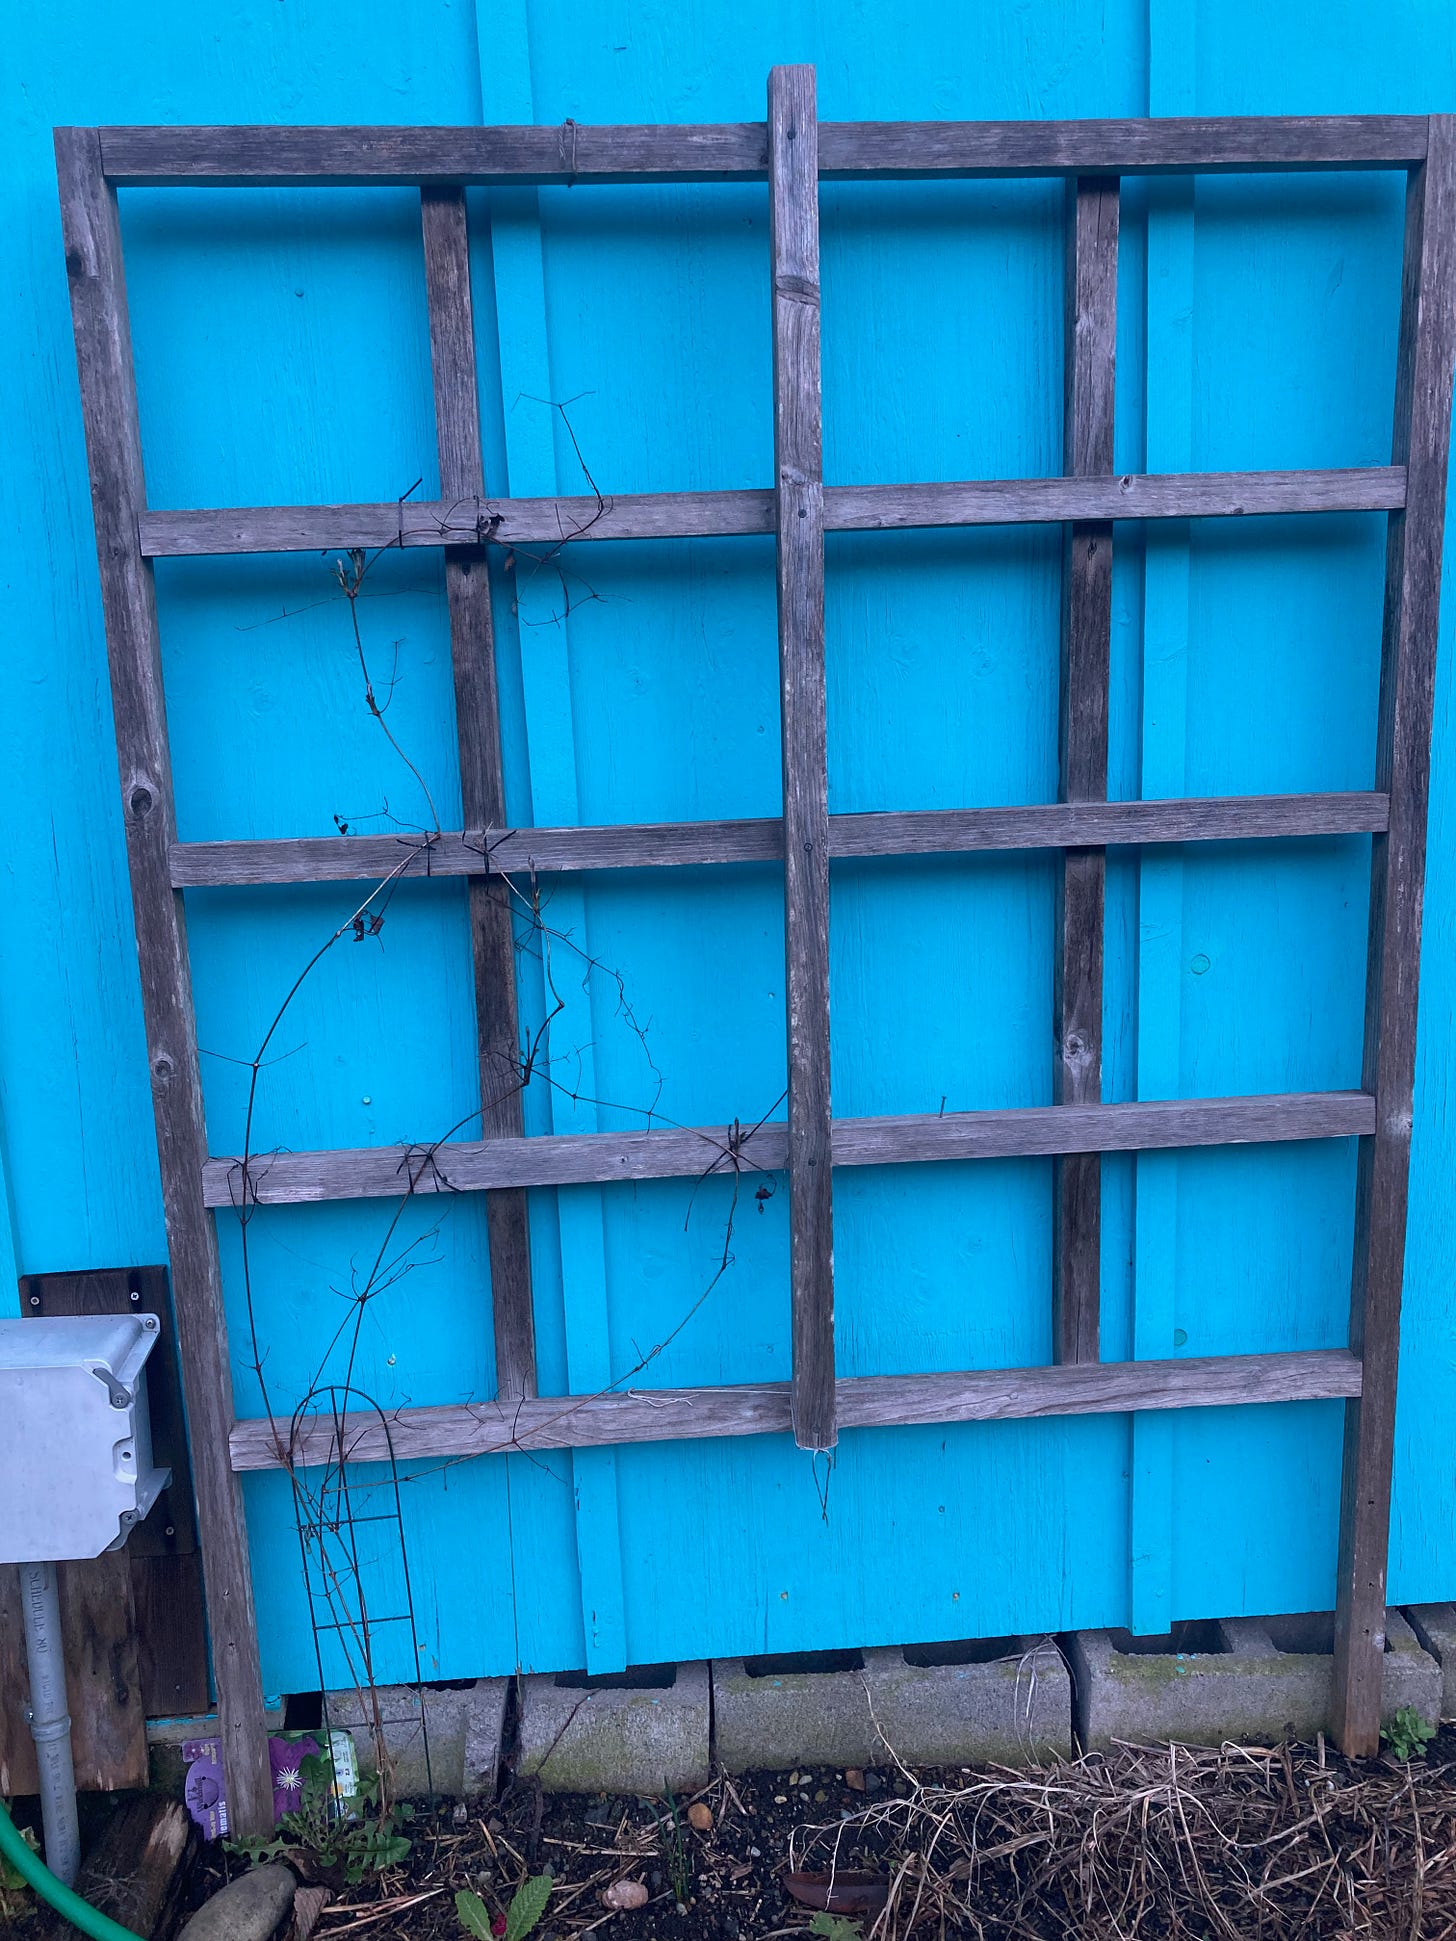 A wooden trellis in front of a bright blue shed wall. Nothing is growing on it.